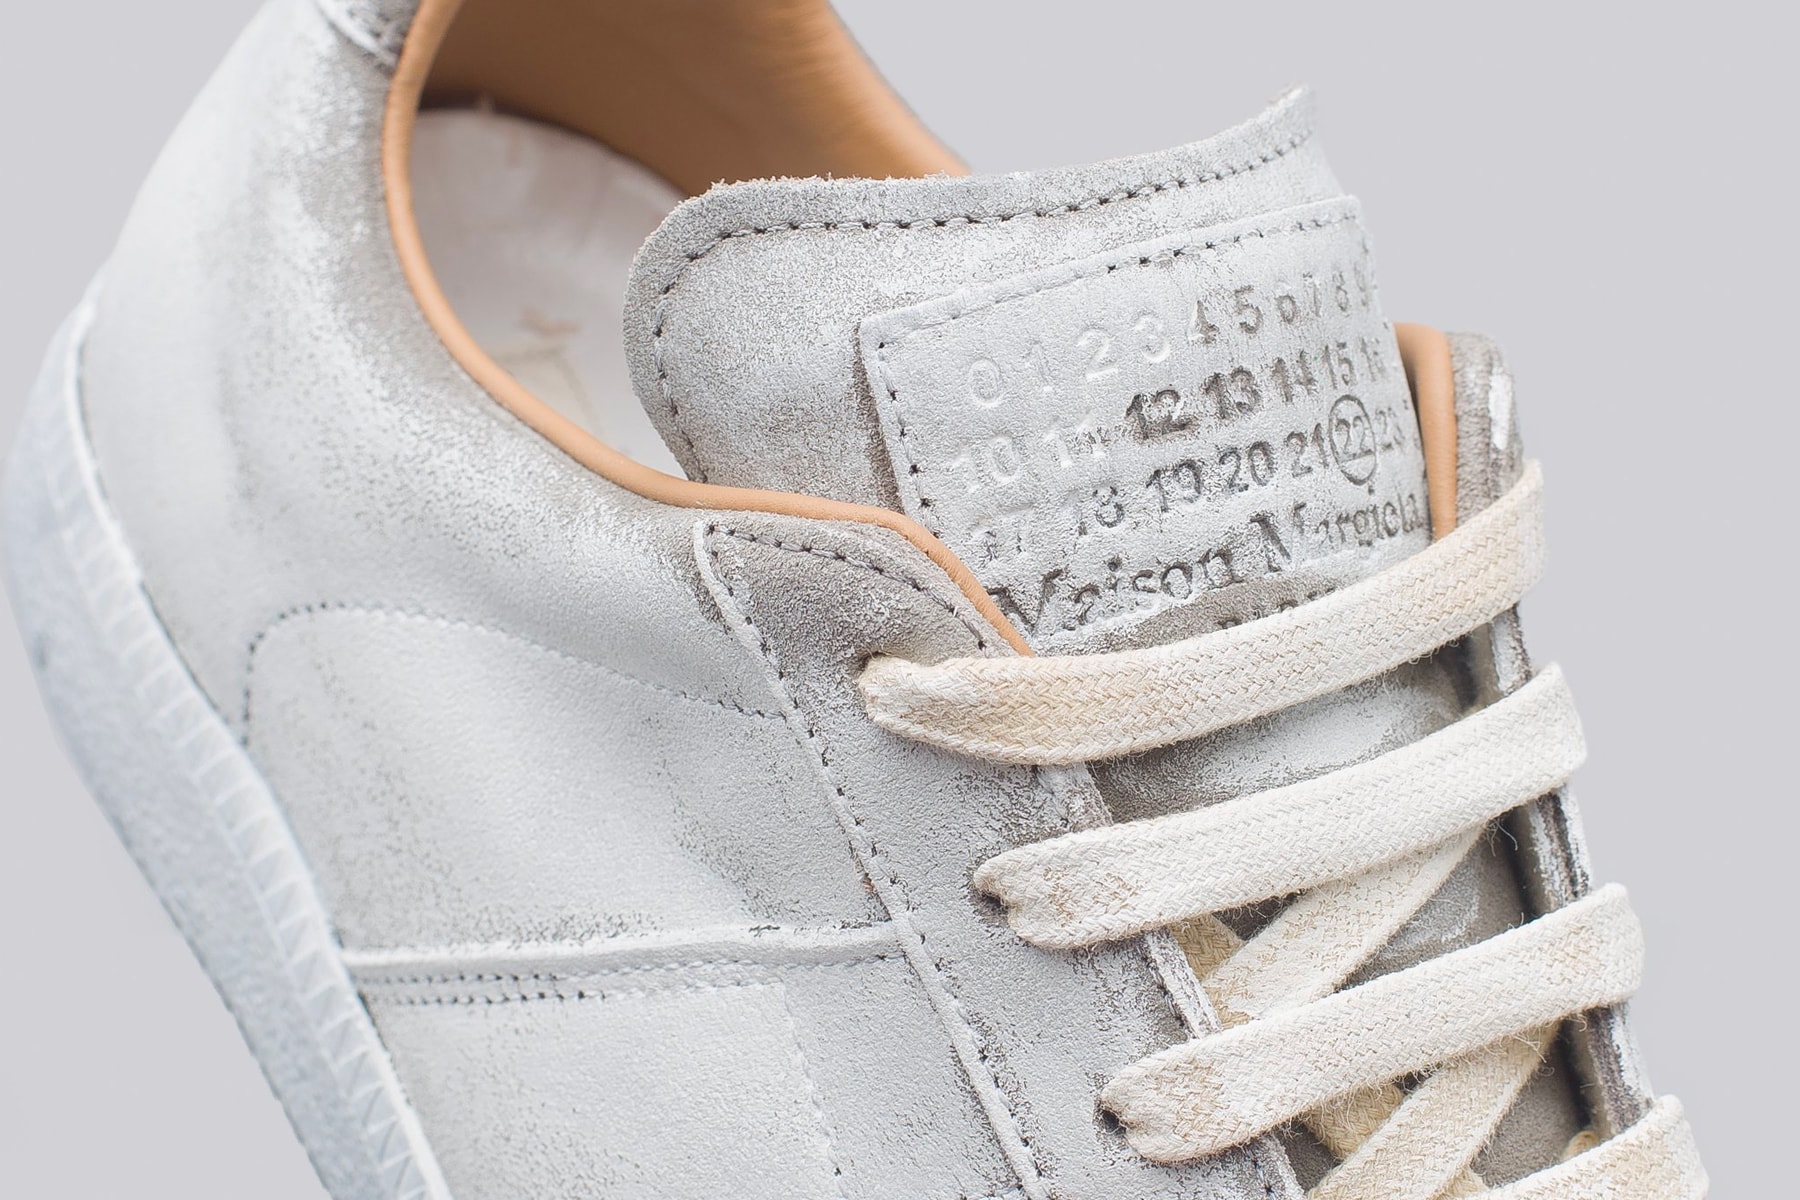 Off-White™ x Nike Air Force 1 Low Grey Paris-Exclusive Release